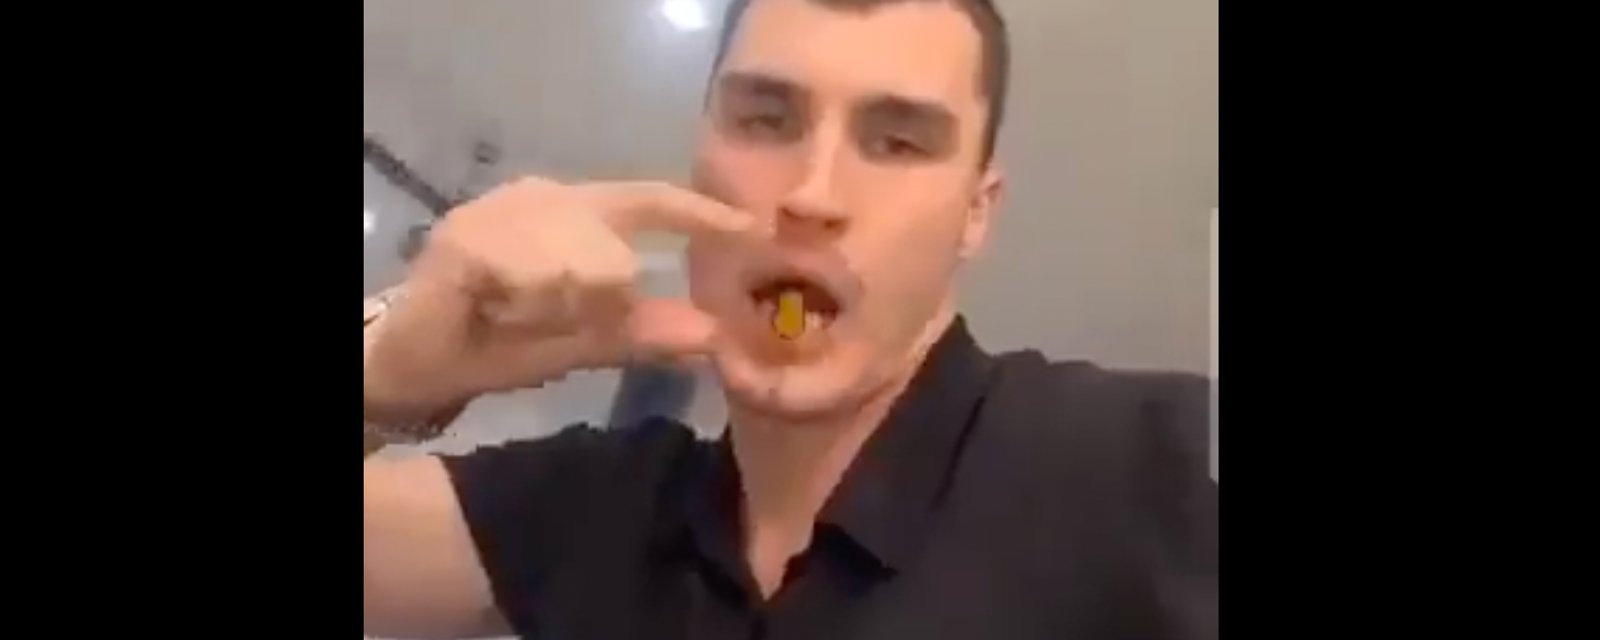 Coyotes’ forward films himself with cocaine, posts it on social media 